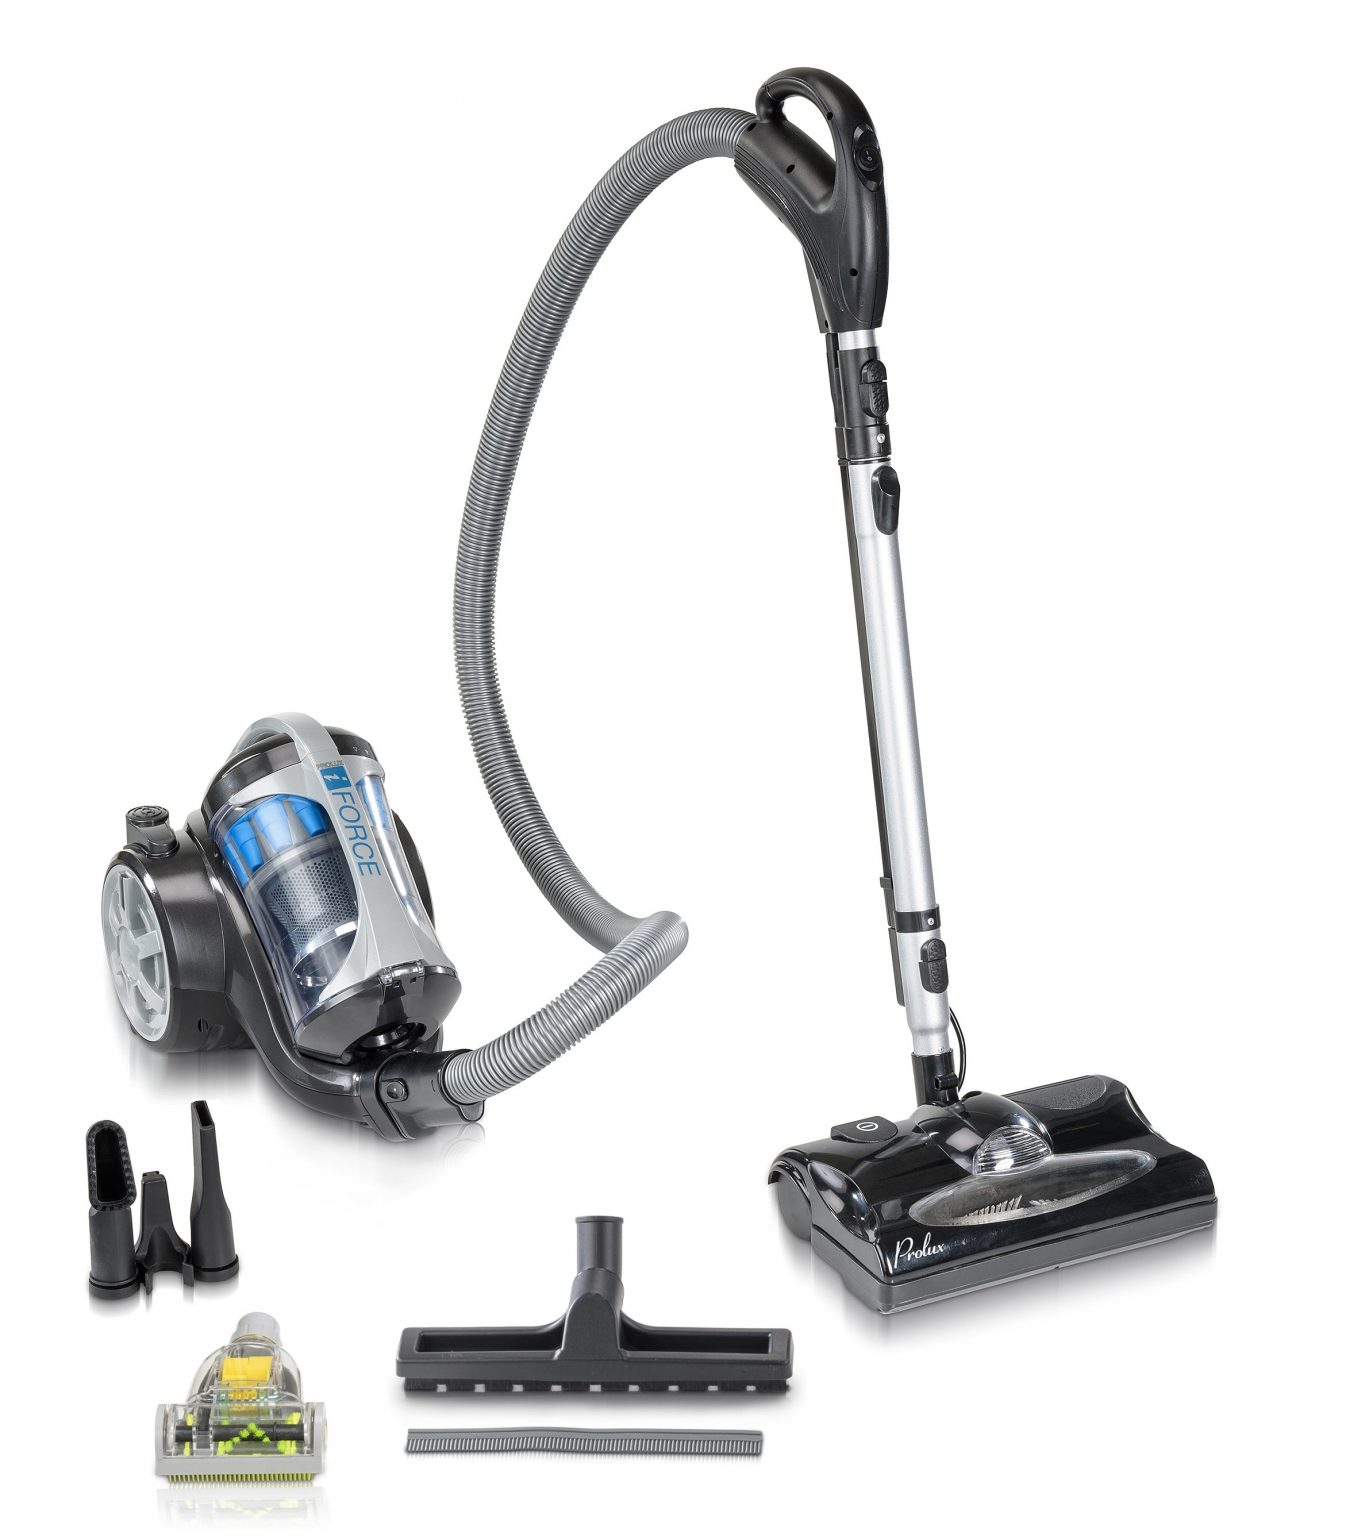 Eureka 3670M Canister Cleaner, Lightweight Powerful Vacuum for Carpets ...